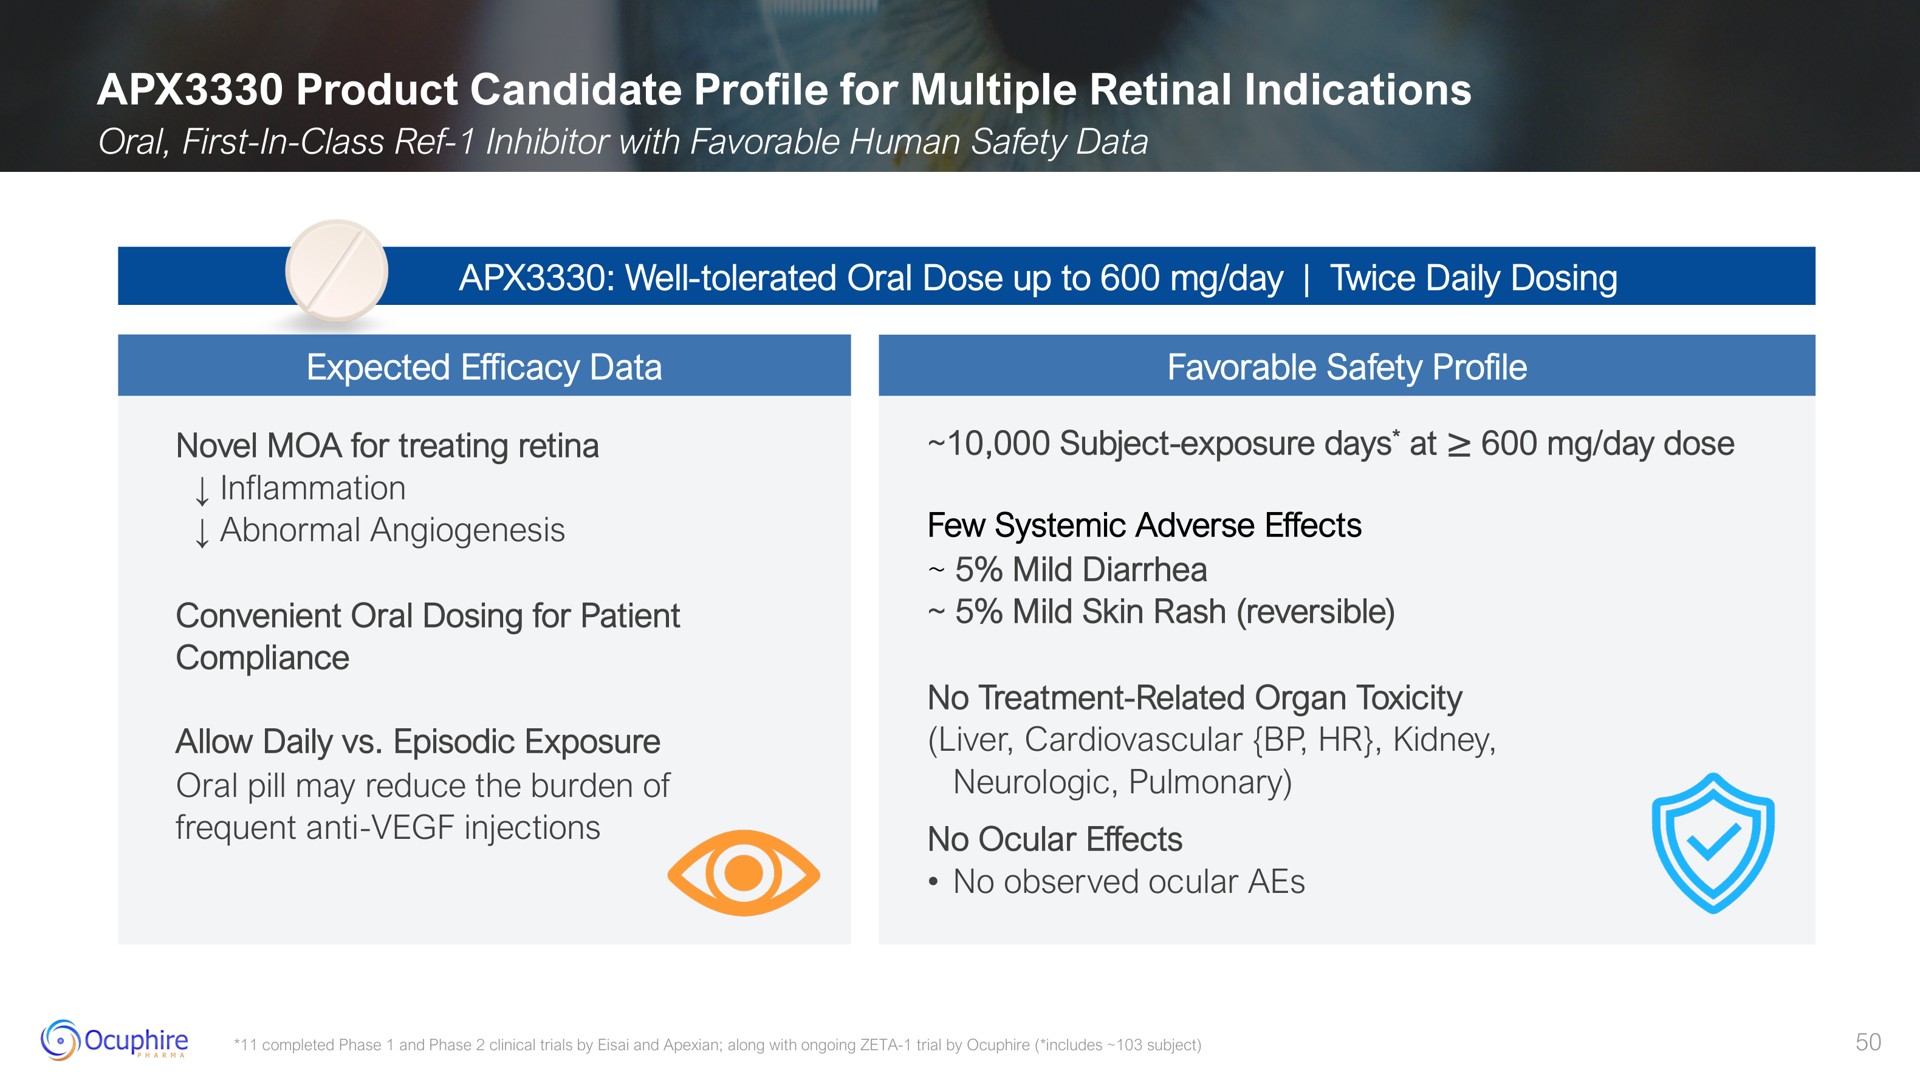 product candidate profile for multiple retinal indications | Ocuphire Pharma